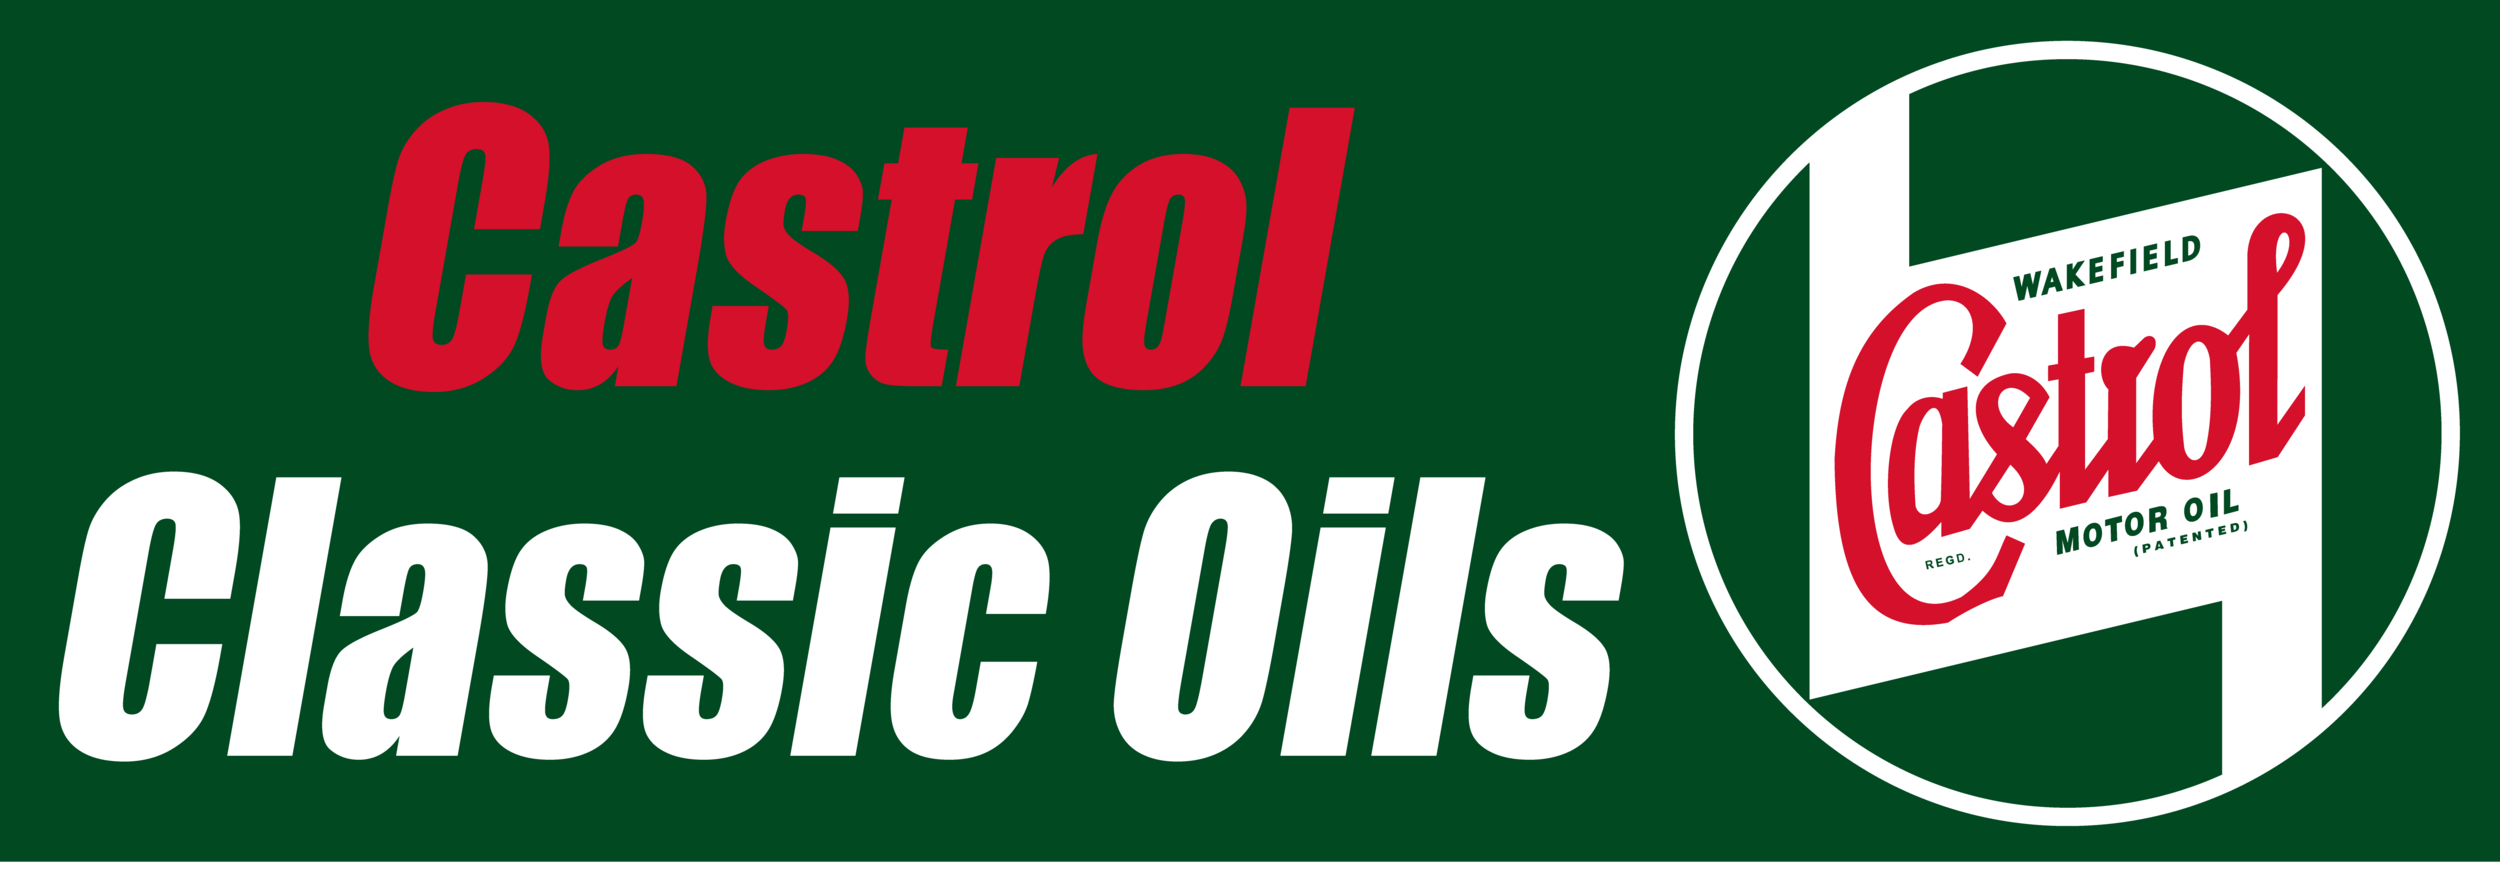 Castrol PERSONALISED CASTROL OIL 2 STROKE MOTORCYCLE RETRO GARAGE SHED METAL SIGN RS262 